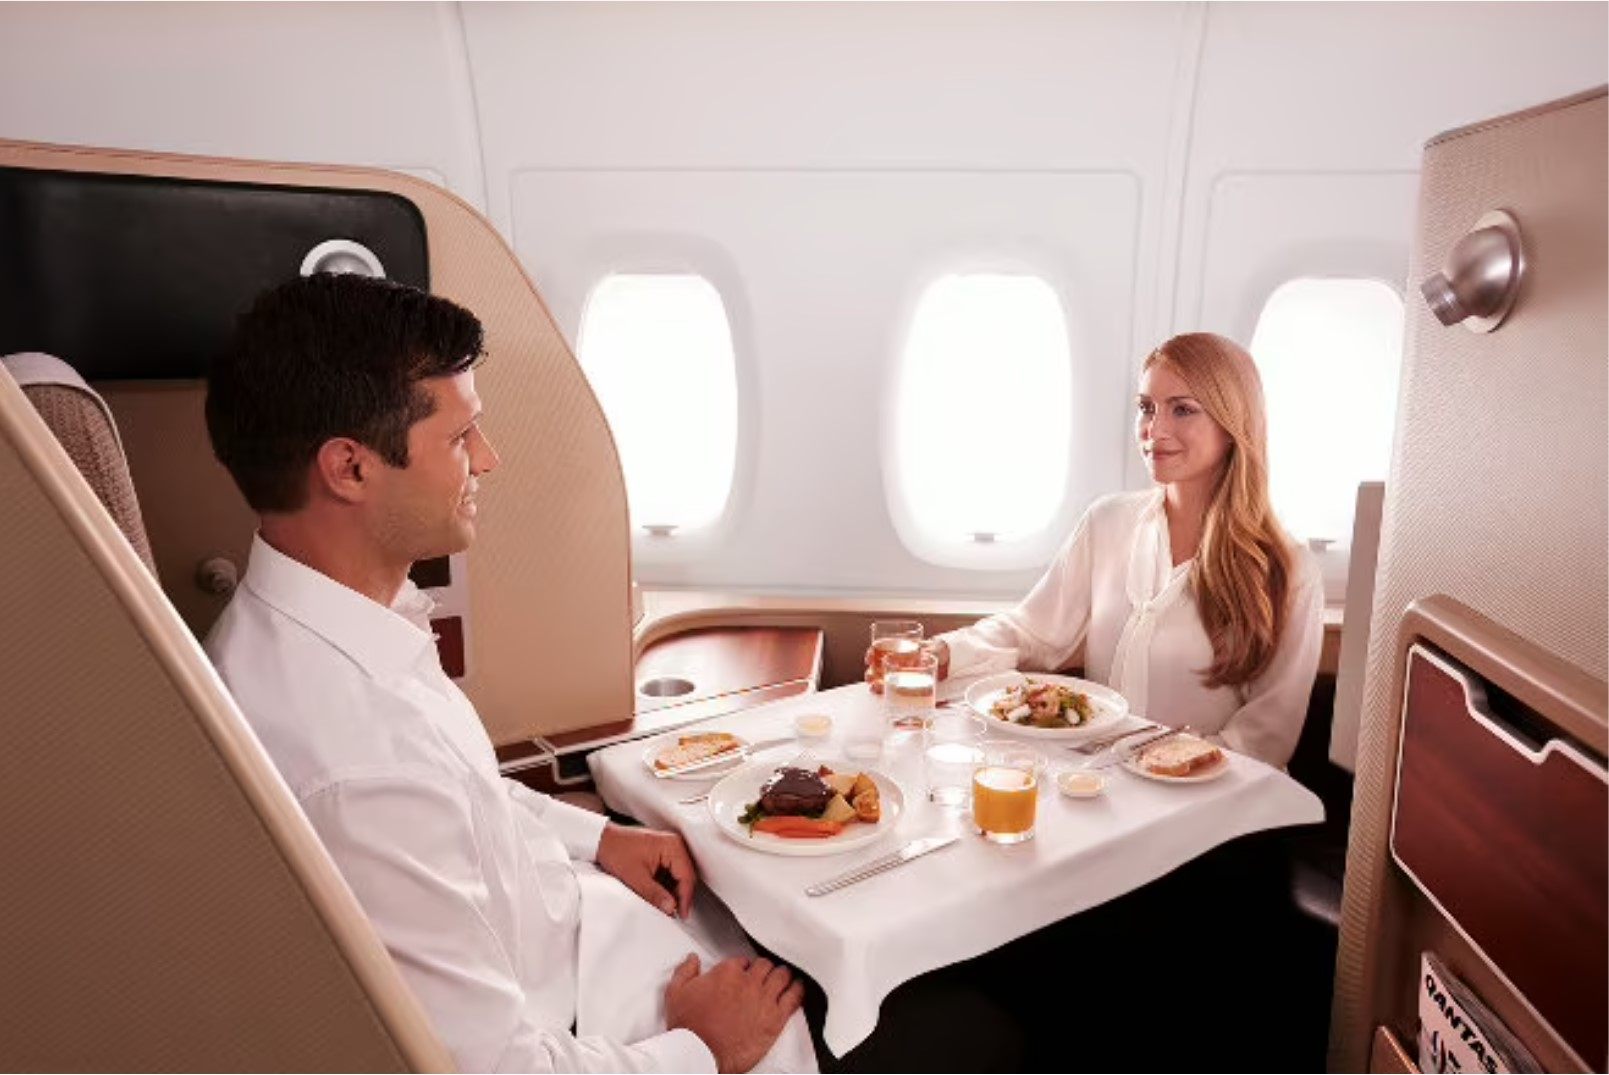 Airlines are showcasing their plush new first classes, with cabins even designed to seat two people in case travellers want to eat together. Photo: Qantas